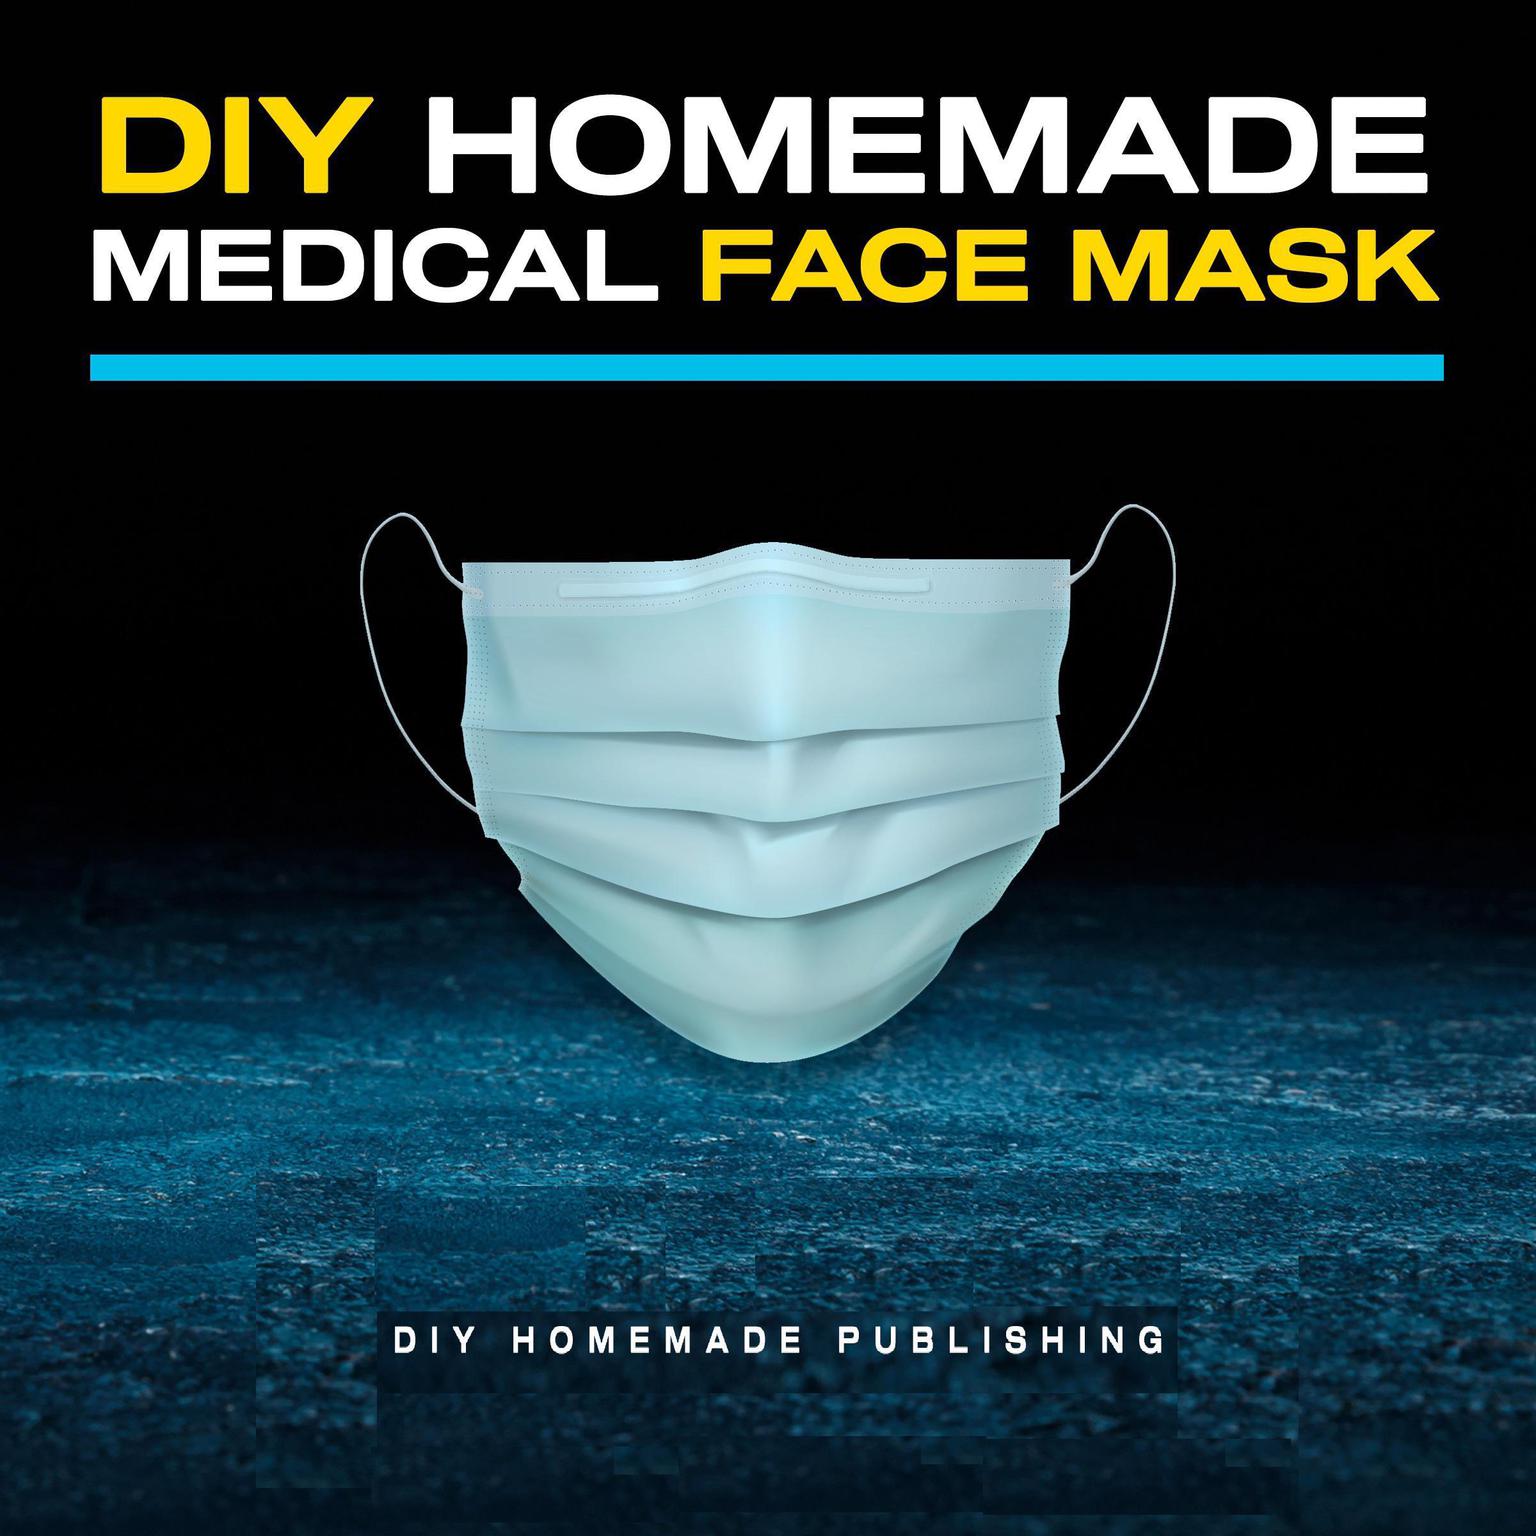 DIY Homemade Medical Face Mask: How to Make Your Medical Reusable Face Mask for Flu Protection. Do It Yourself in 10 Simple Steps (with Pictures), for Adults and Kids Audiobook, by DIY Homemade Publishing